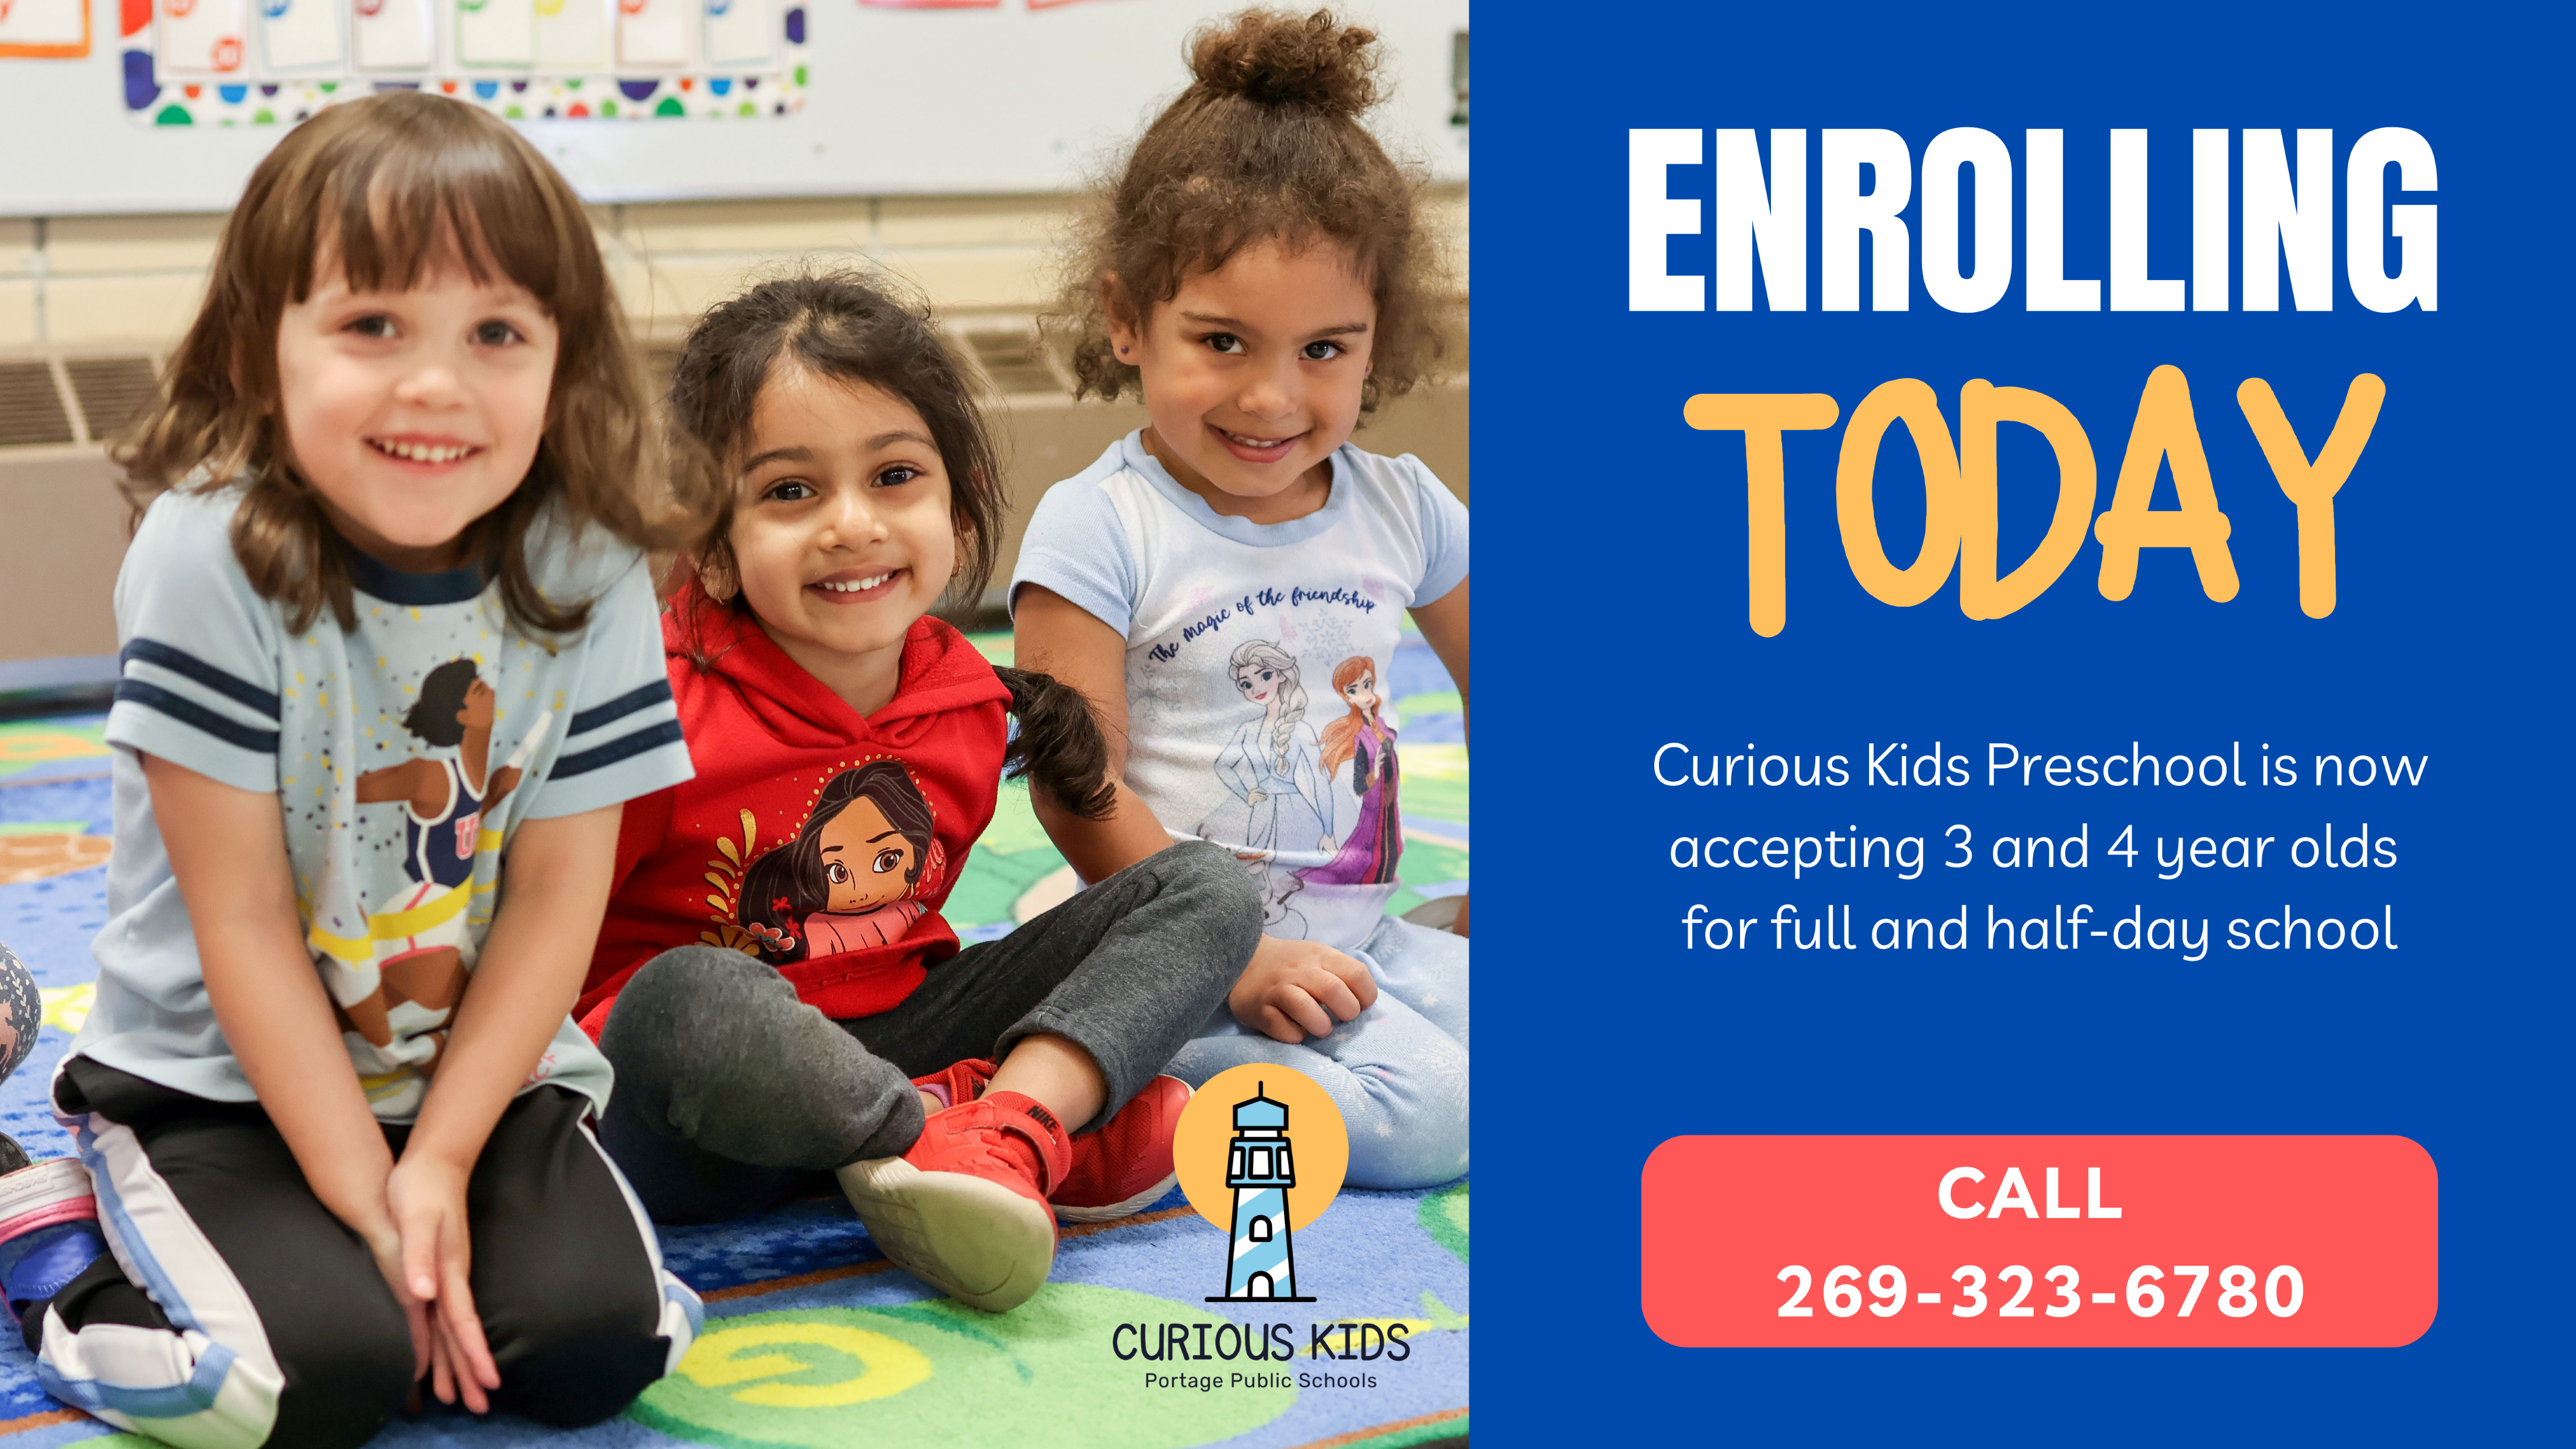 a photo of students on a graphic that reads "Now Enrolling" Curious Kids Preschool is now accepting 3 and 4 year olds for full and half-day school. Call 269-323-6780